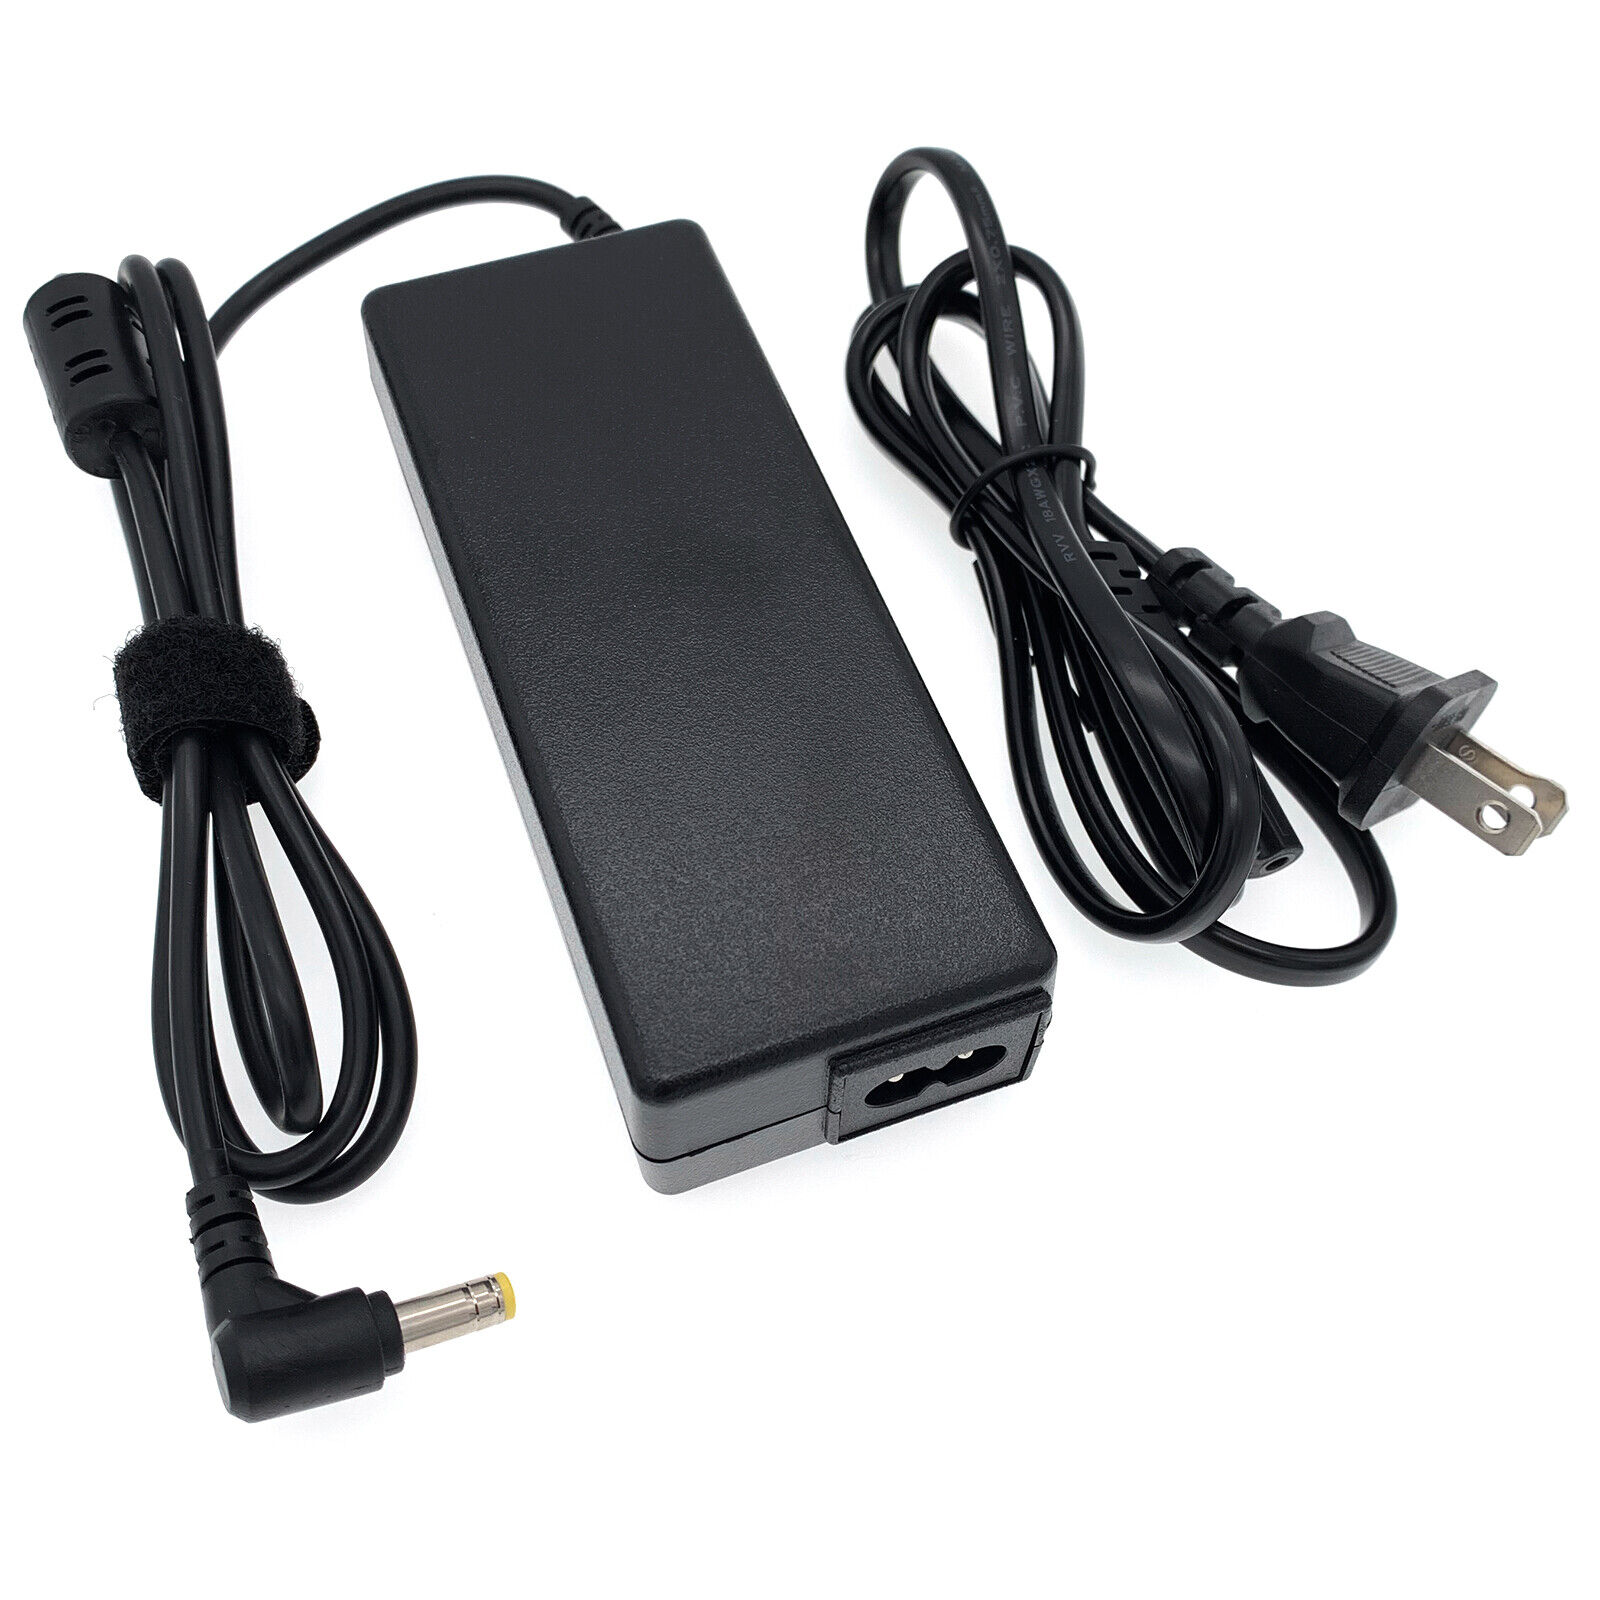 75W HP AC DC Adapter Power Charger for Vintage OmniBook 6100 7100 XE2 XE3 w/Cord